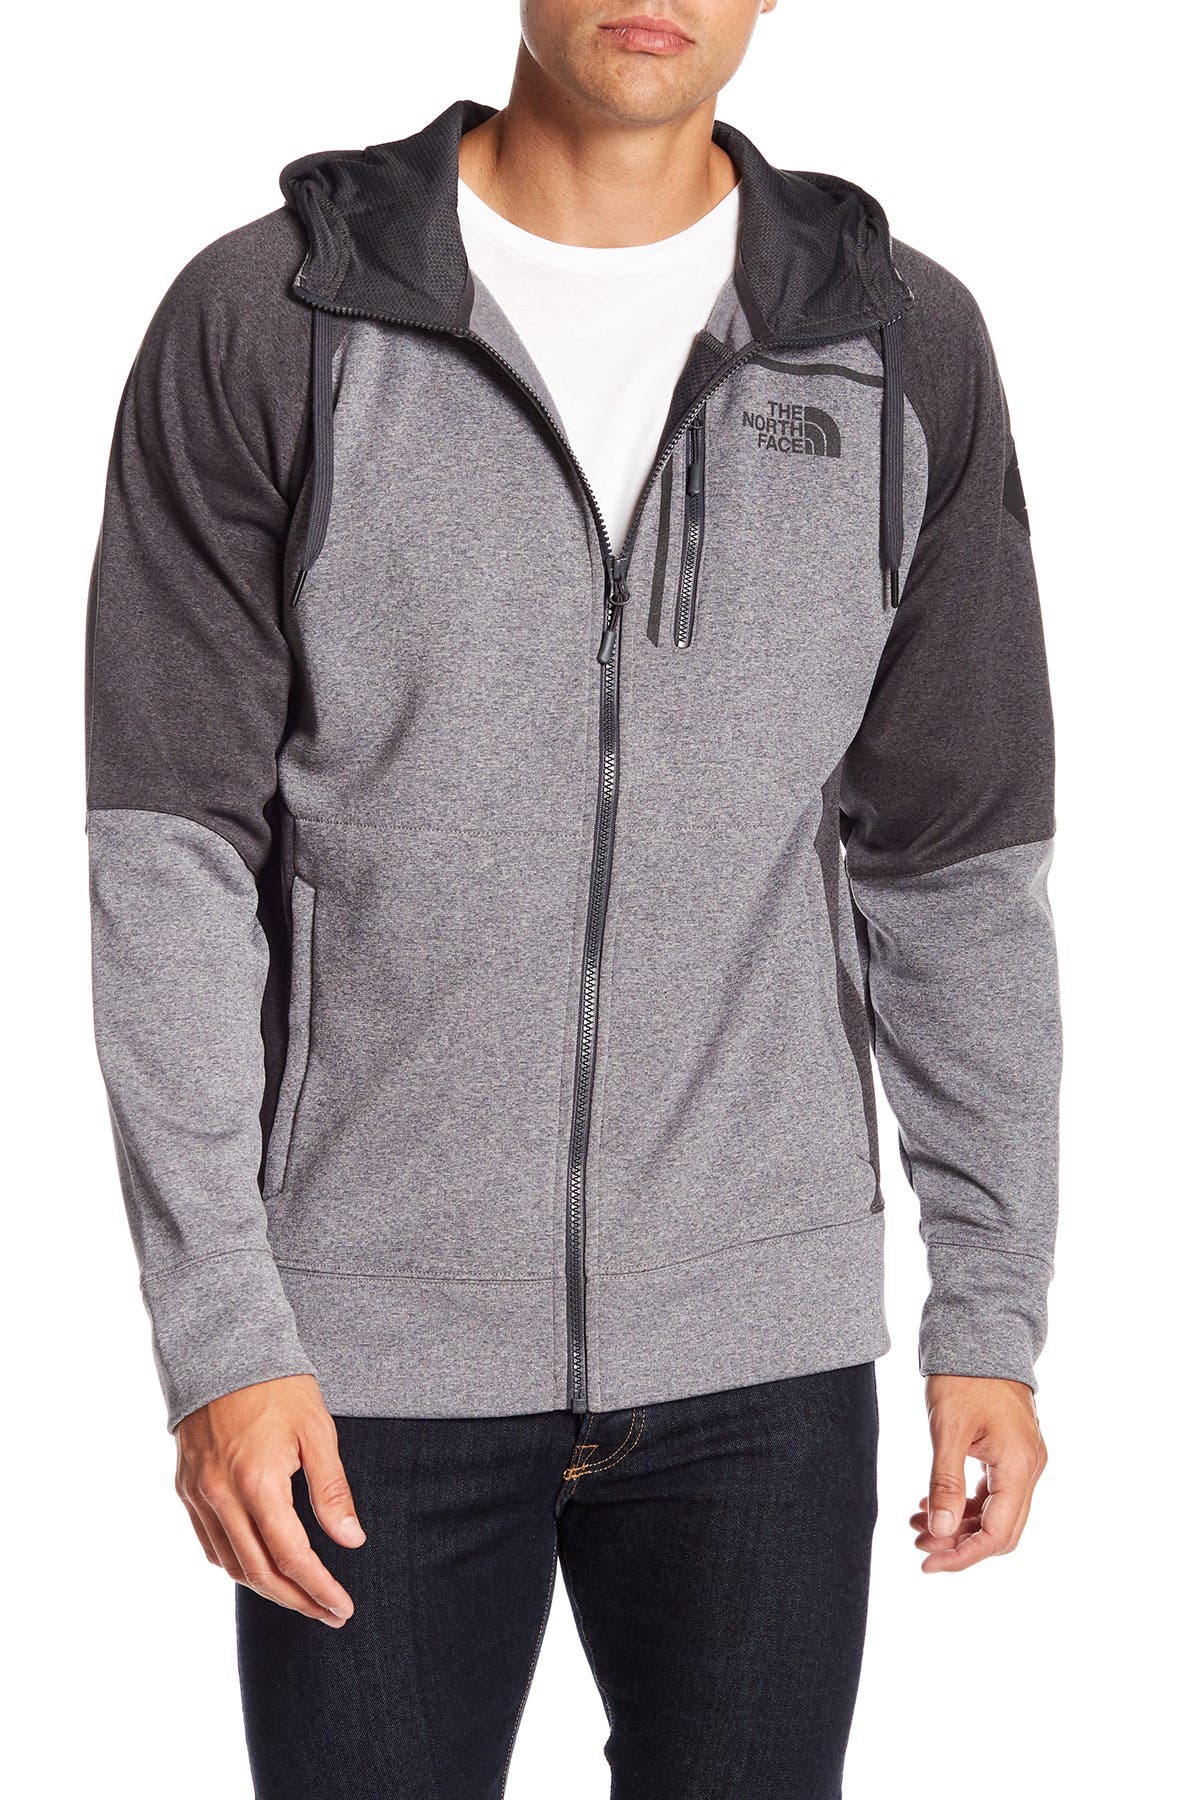 the north face zip up hoodie